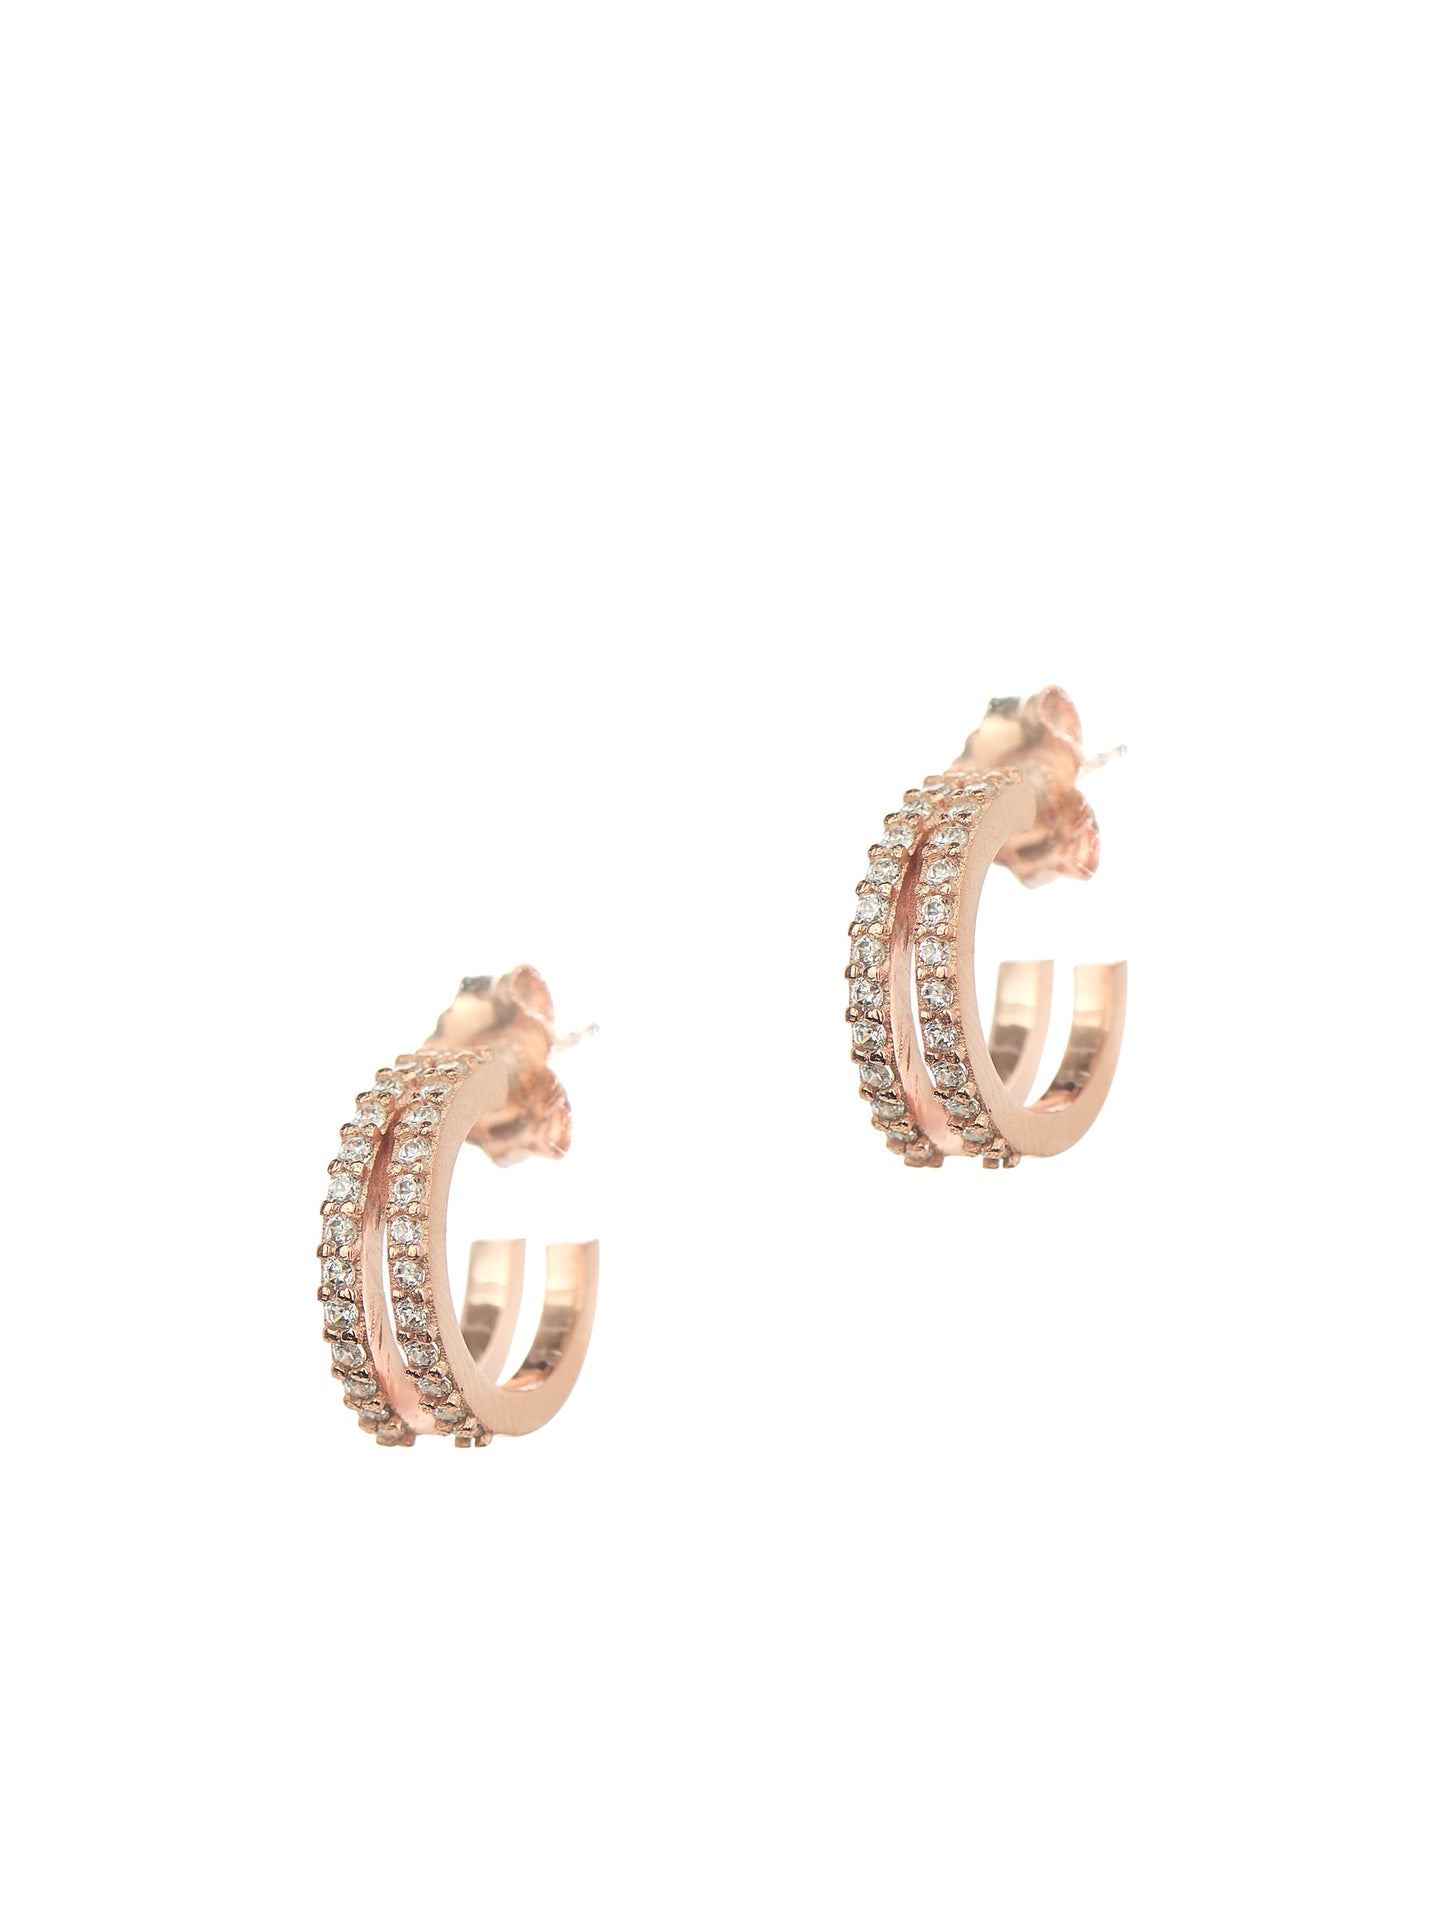 Double Pair Hoops earrings - Pink Gold Plated